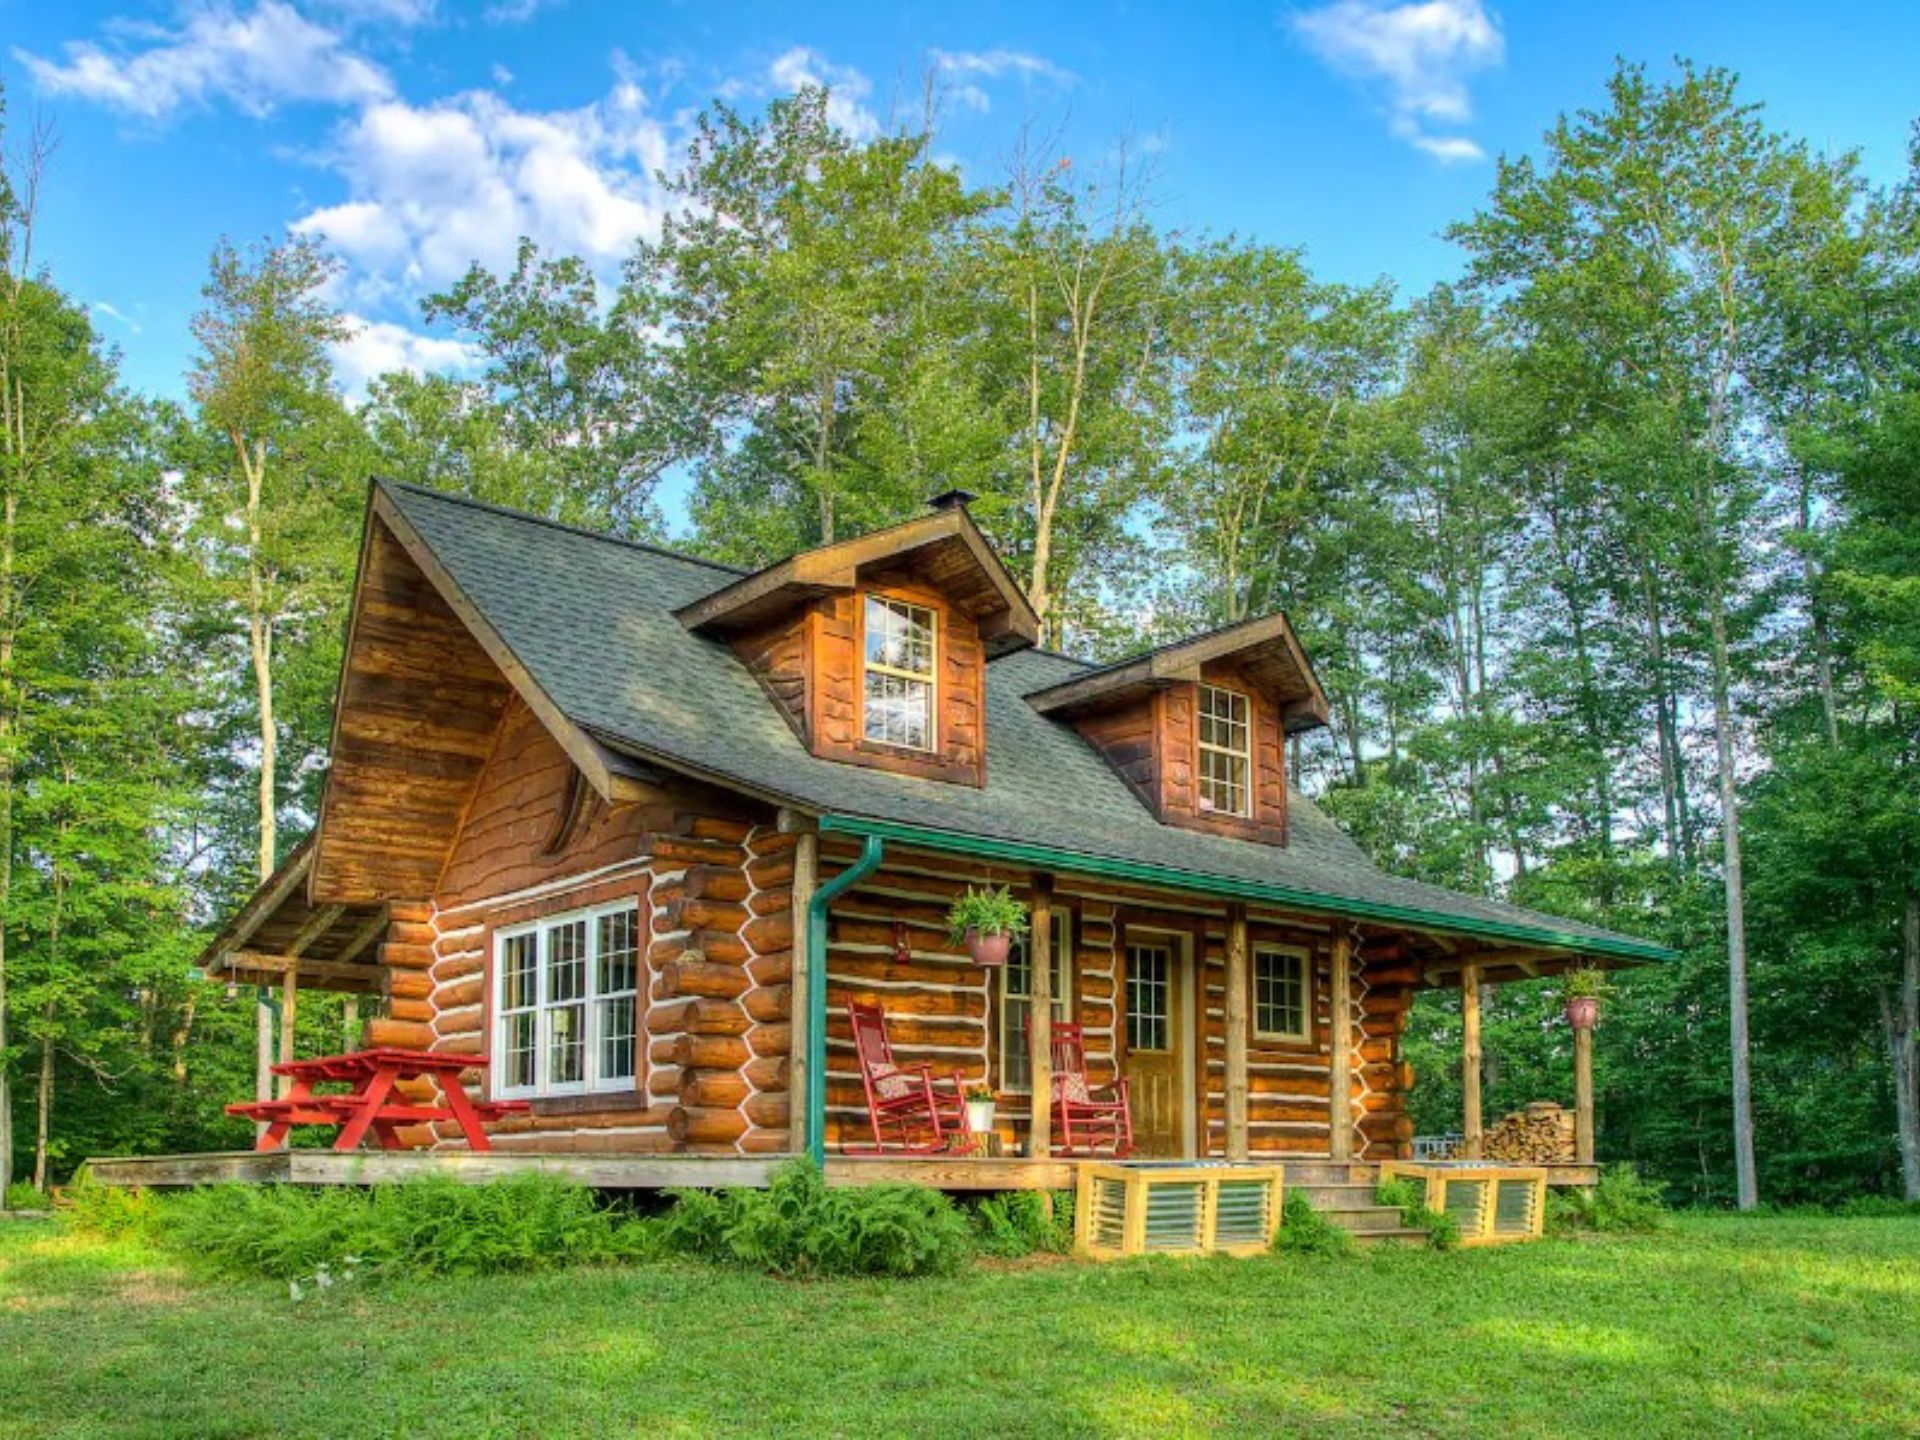 exterior of a wooden cabin in the woods